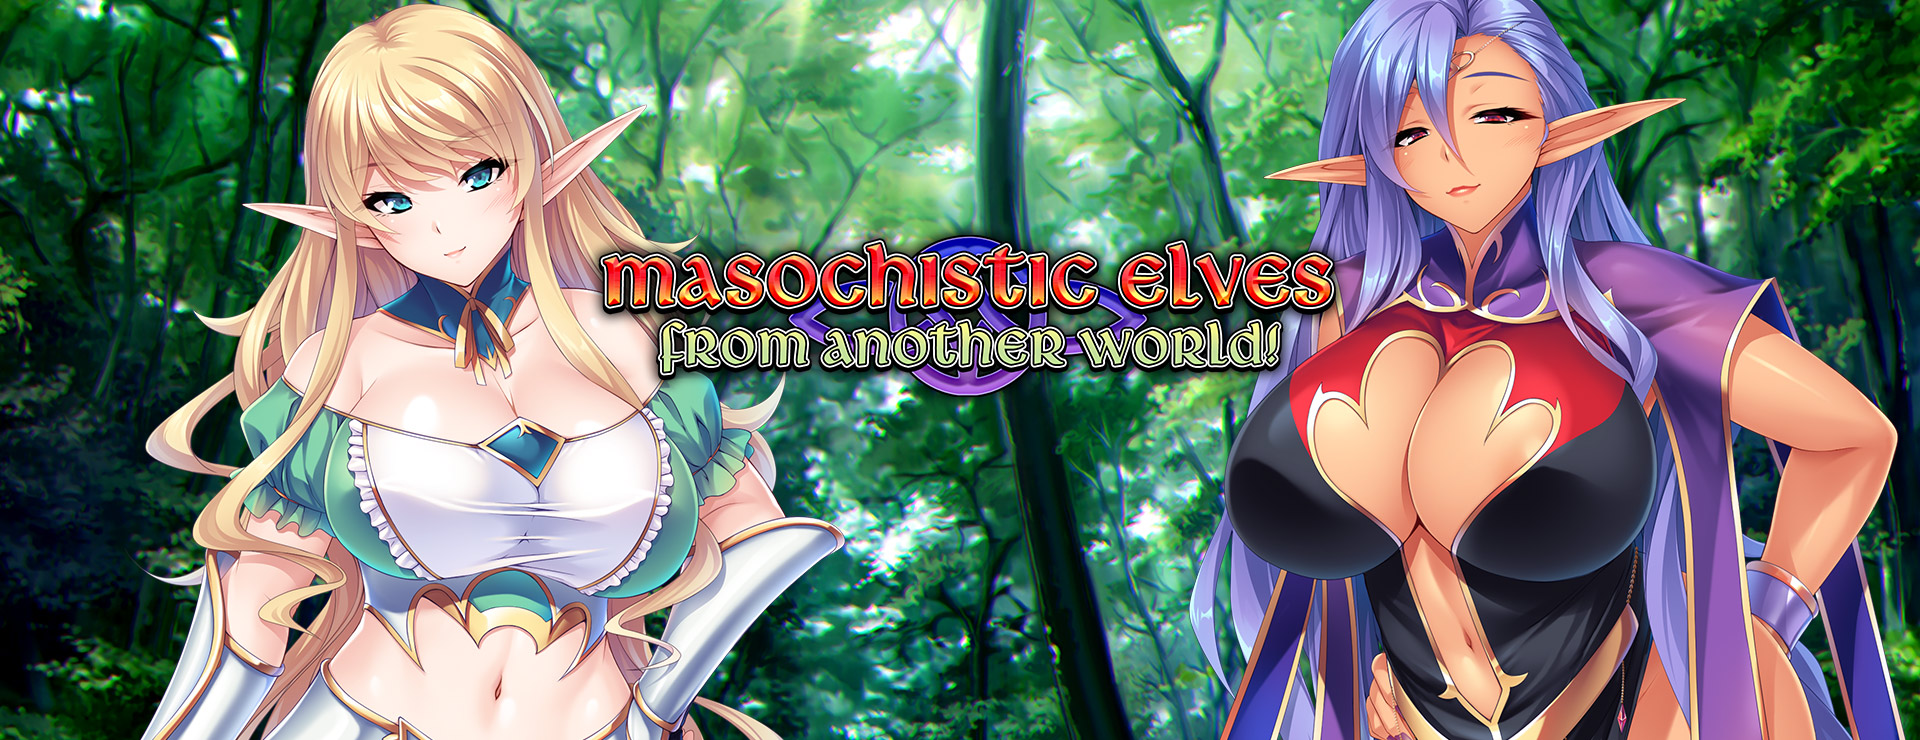 Masochistic Elves from Another World - ビジュアルノベル ゲーム